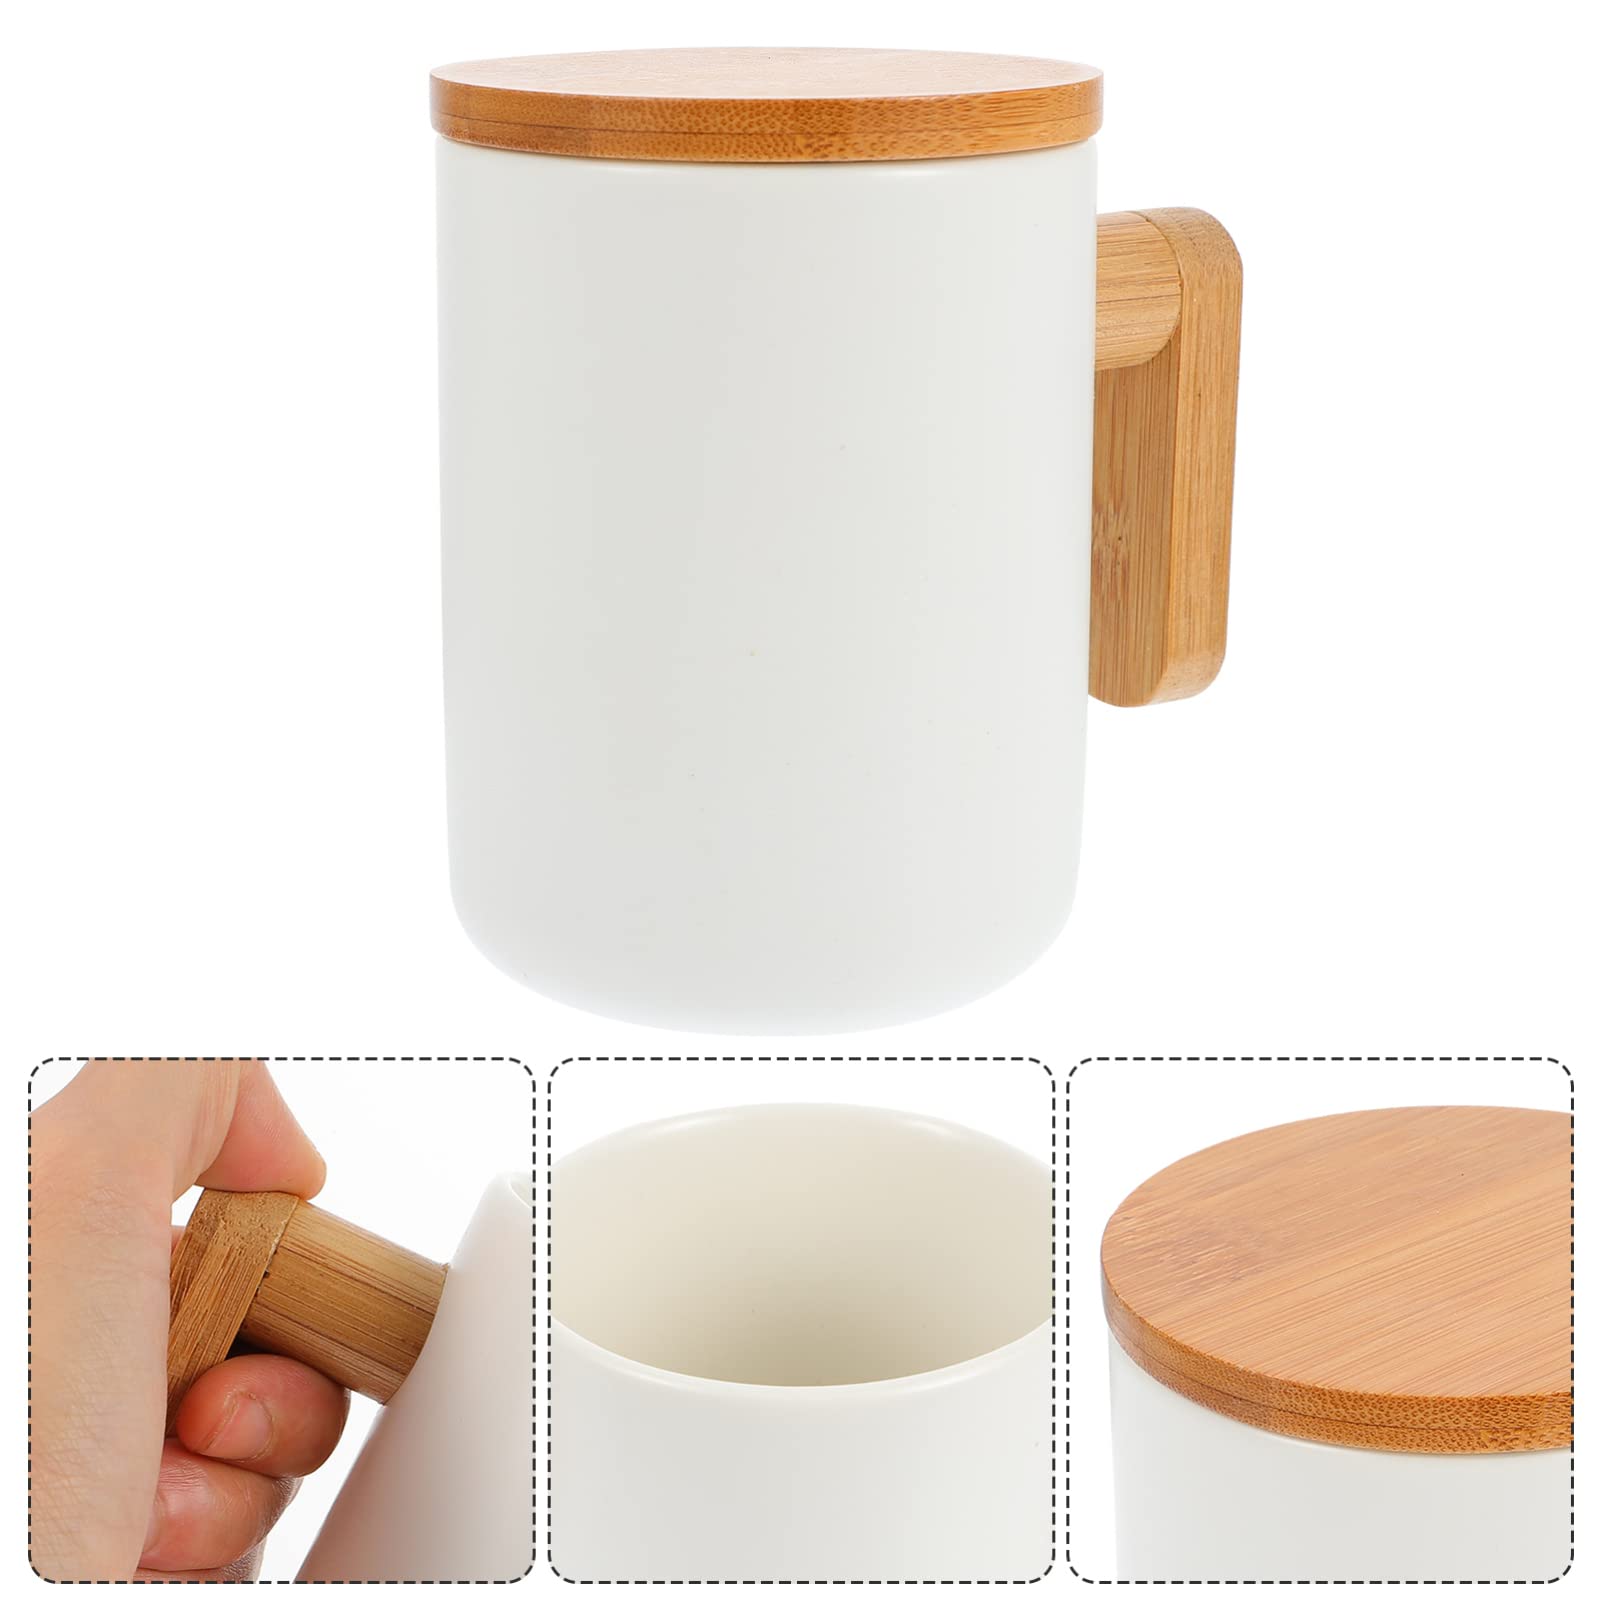 Veemoon Flat Bottom Coffee Mug with Wood Lid, 380 ML Ceramic Cup for Coffee Warmer, Keeps Warm for Tea, Cocoa, Milk and Hot Beverage